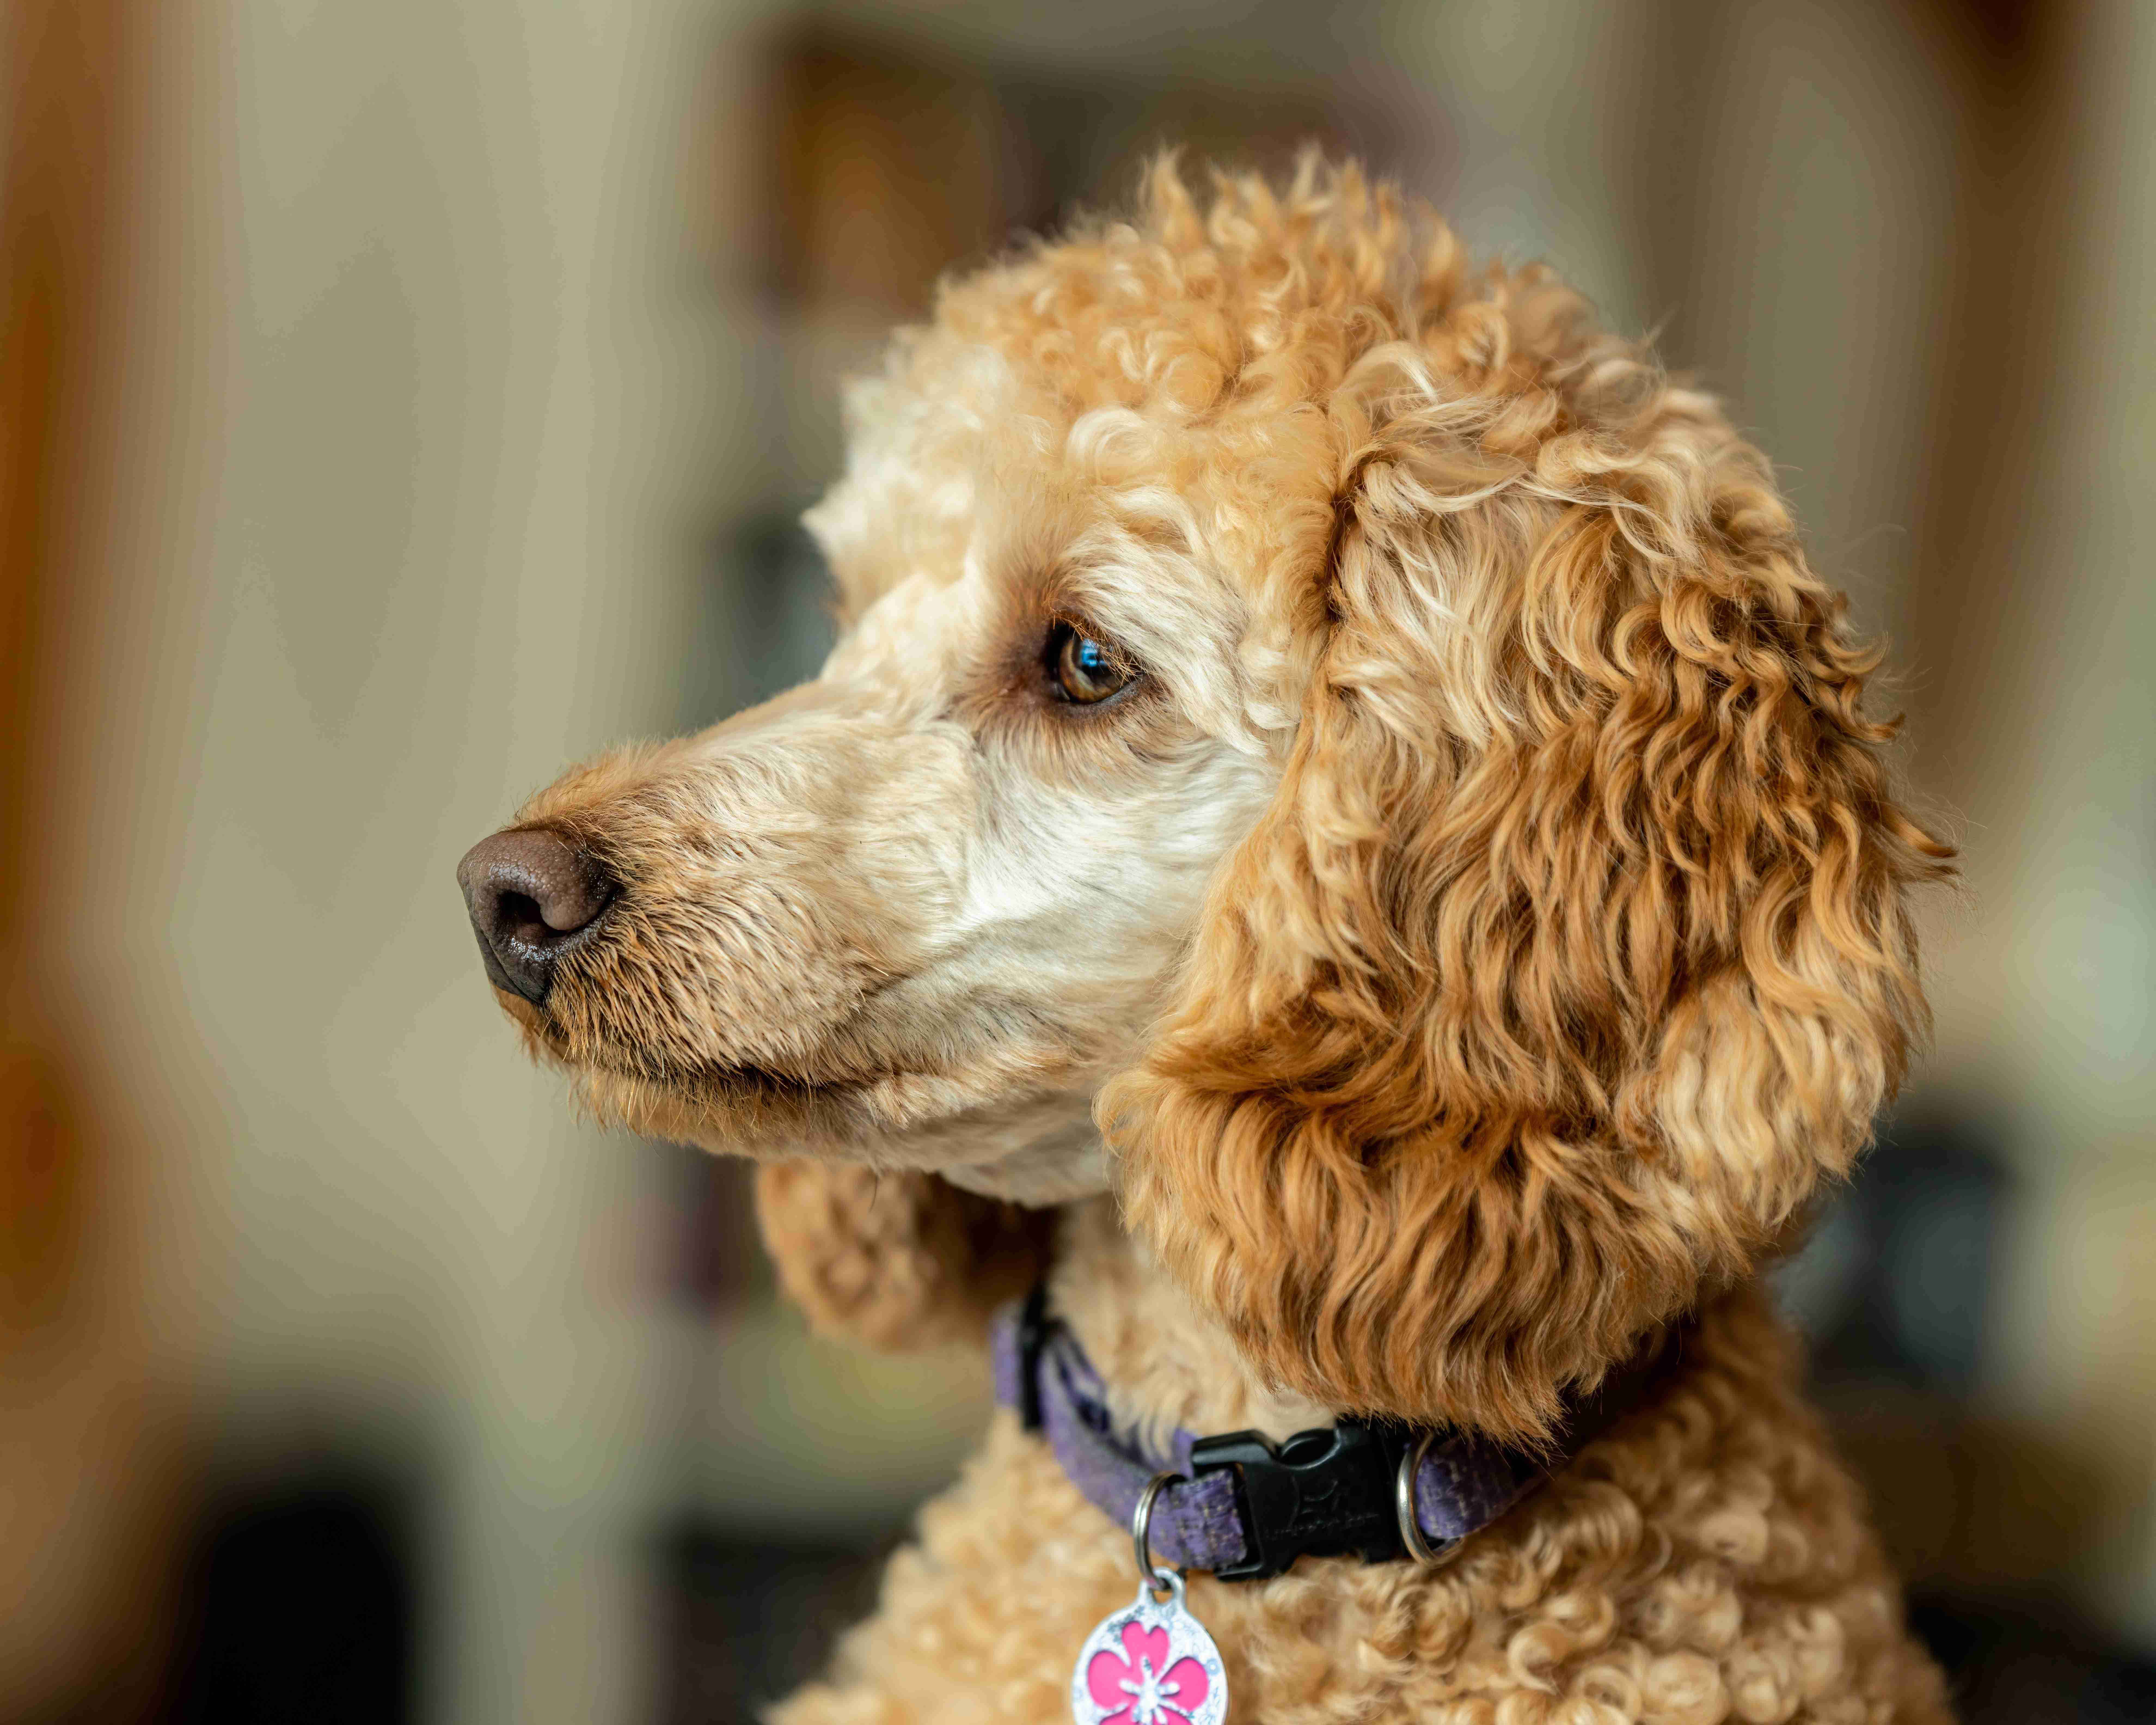 What kind of supplies should you have ready for your Poodle puppy during the first two weeks?